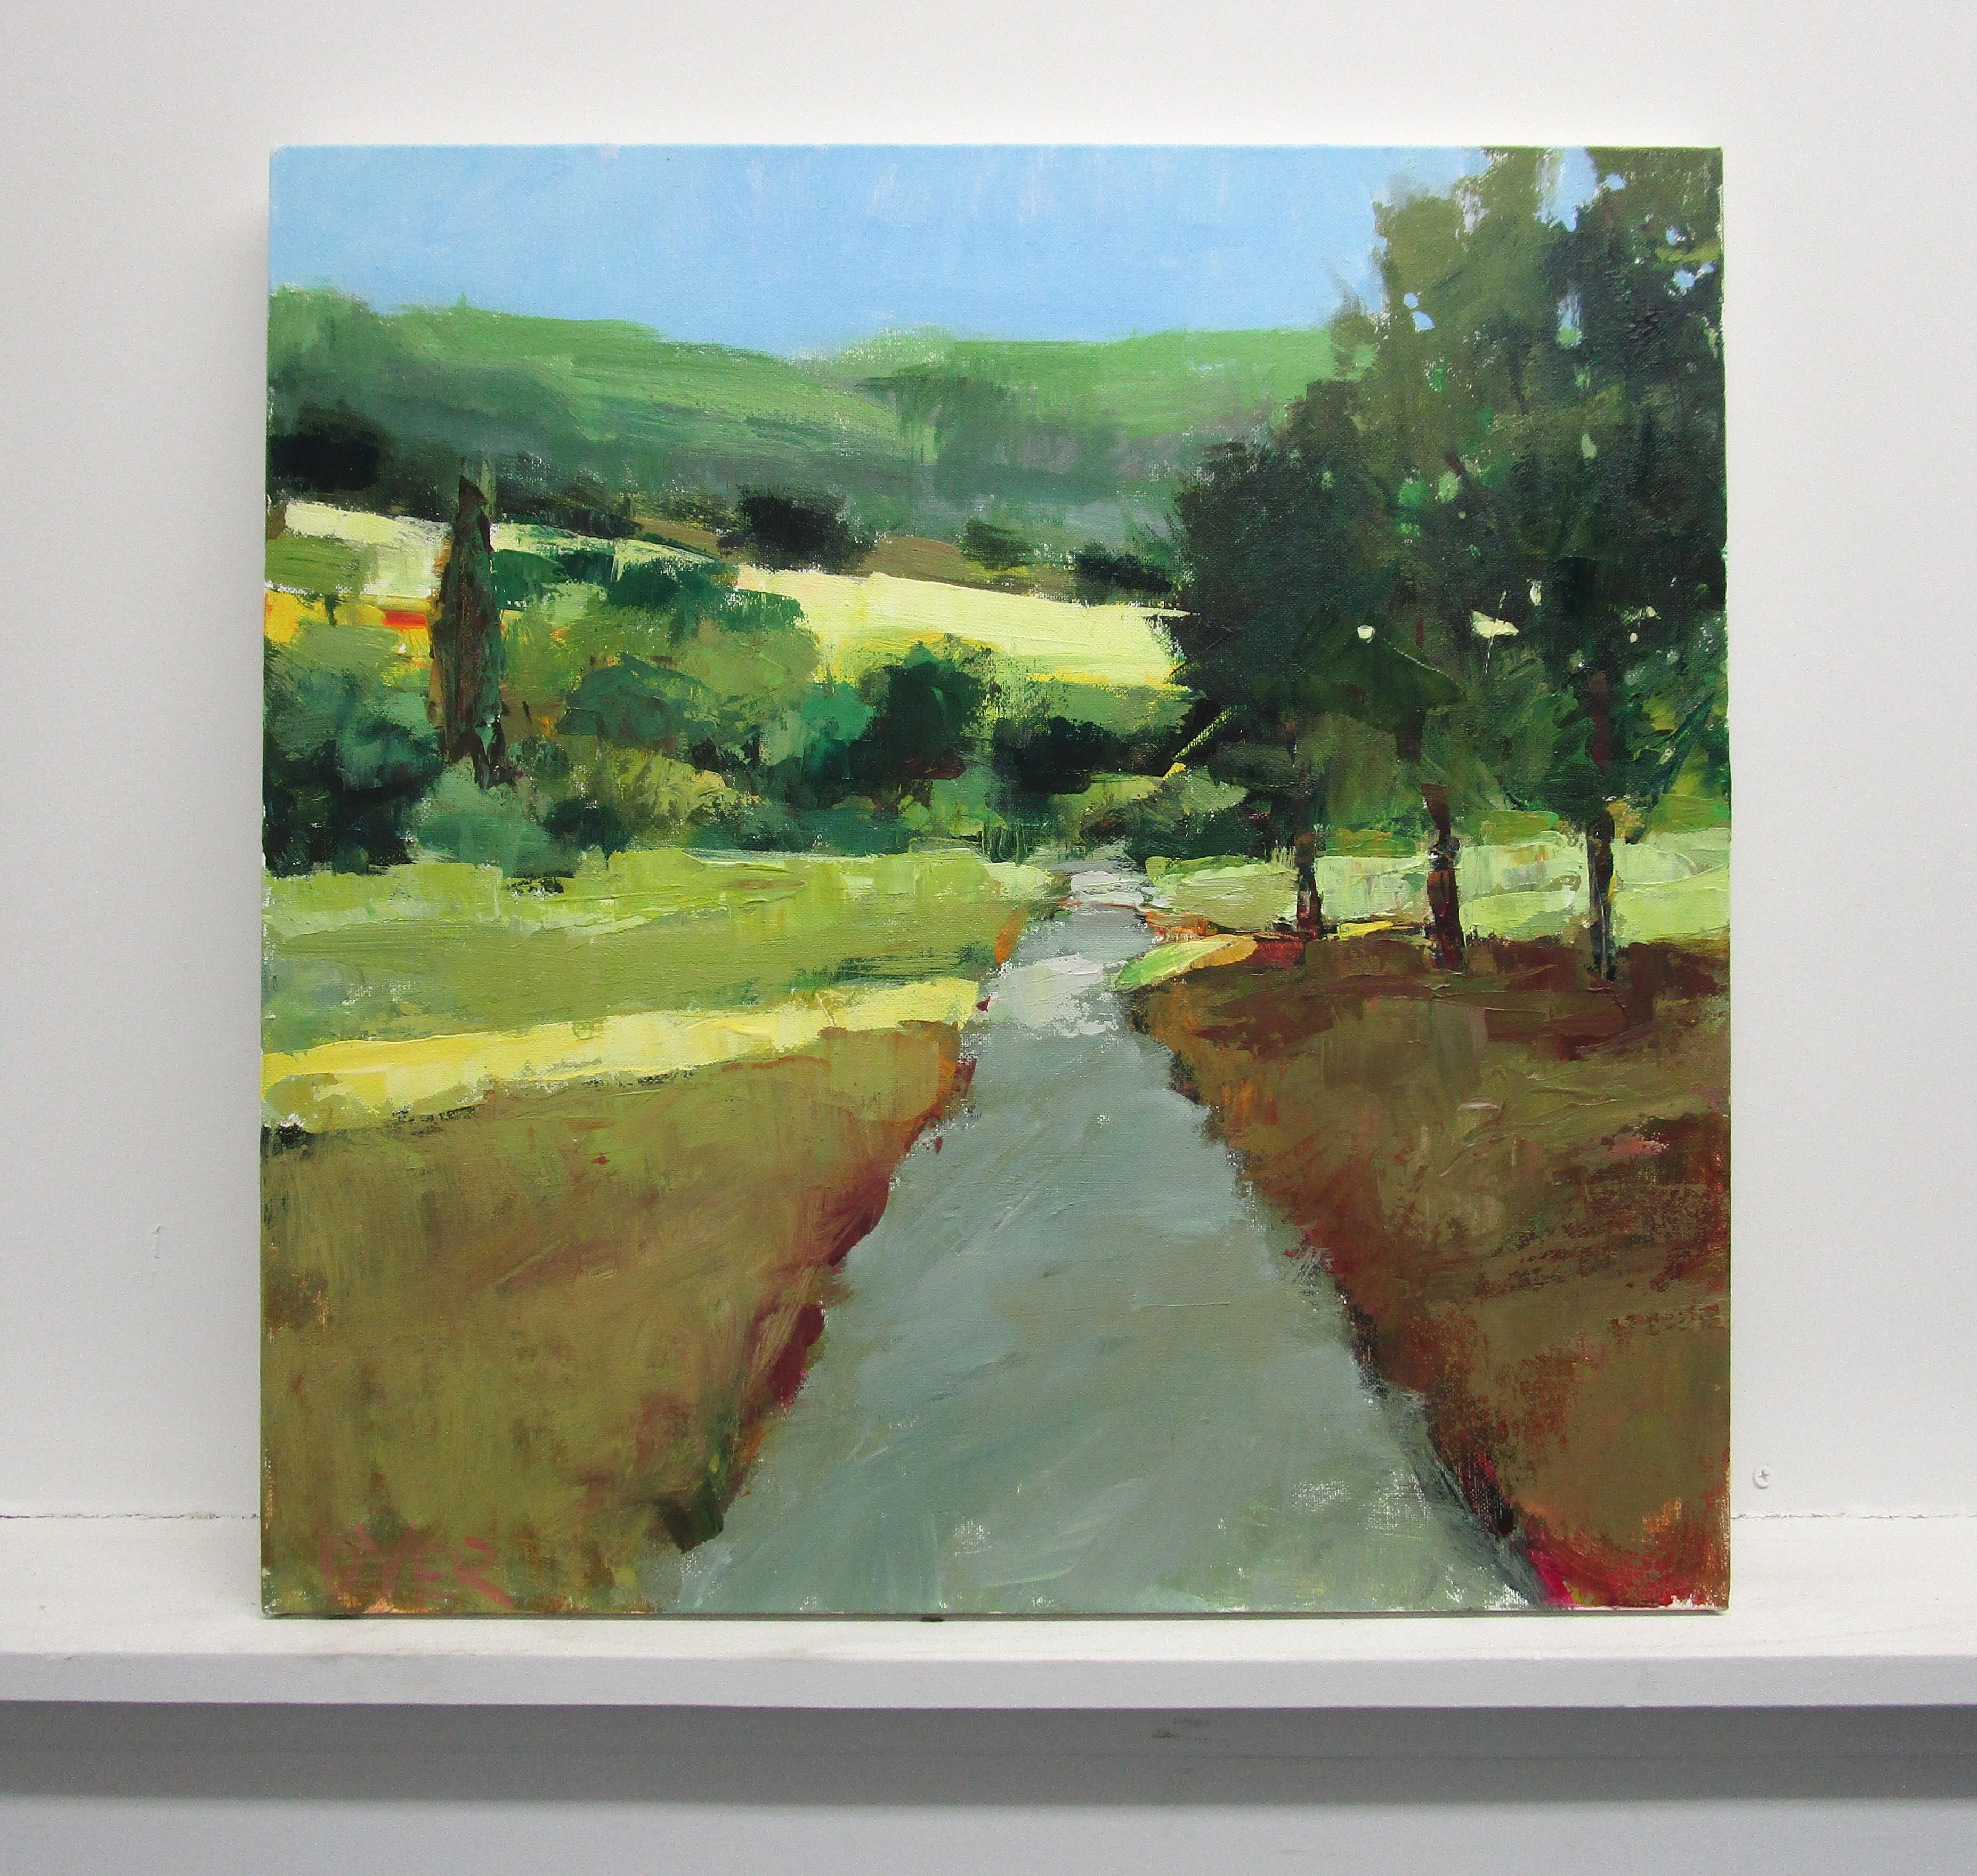 <p>Artist Comments<br />Using mostly a palette knife, artist Janet Dyer presents a serene path through a field of golden grass in Provence, France. Rays of sunshine cut through a line of trees and bathe the verdant hills beyond. 